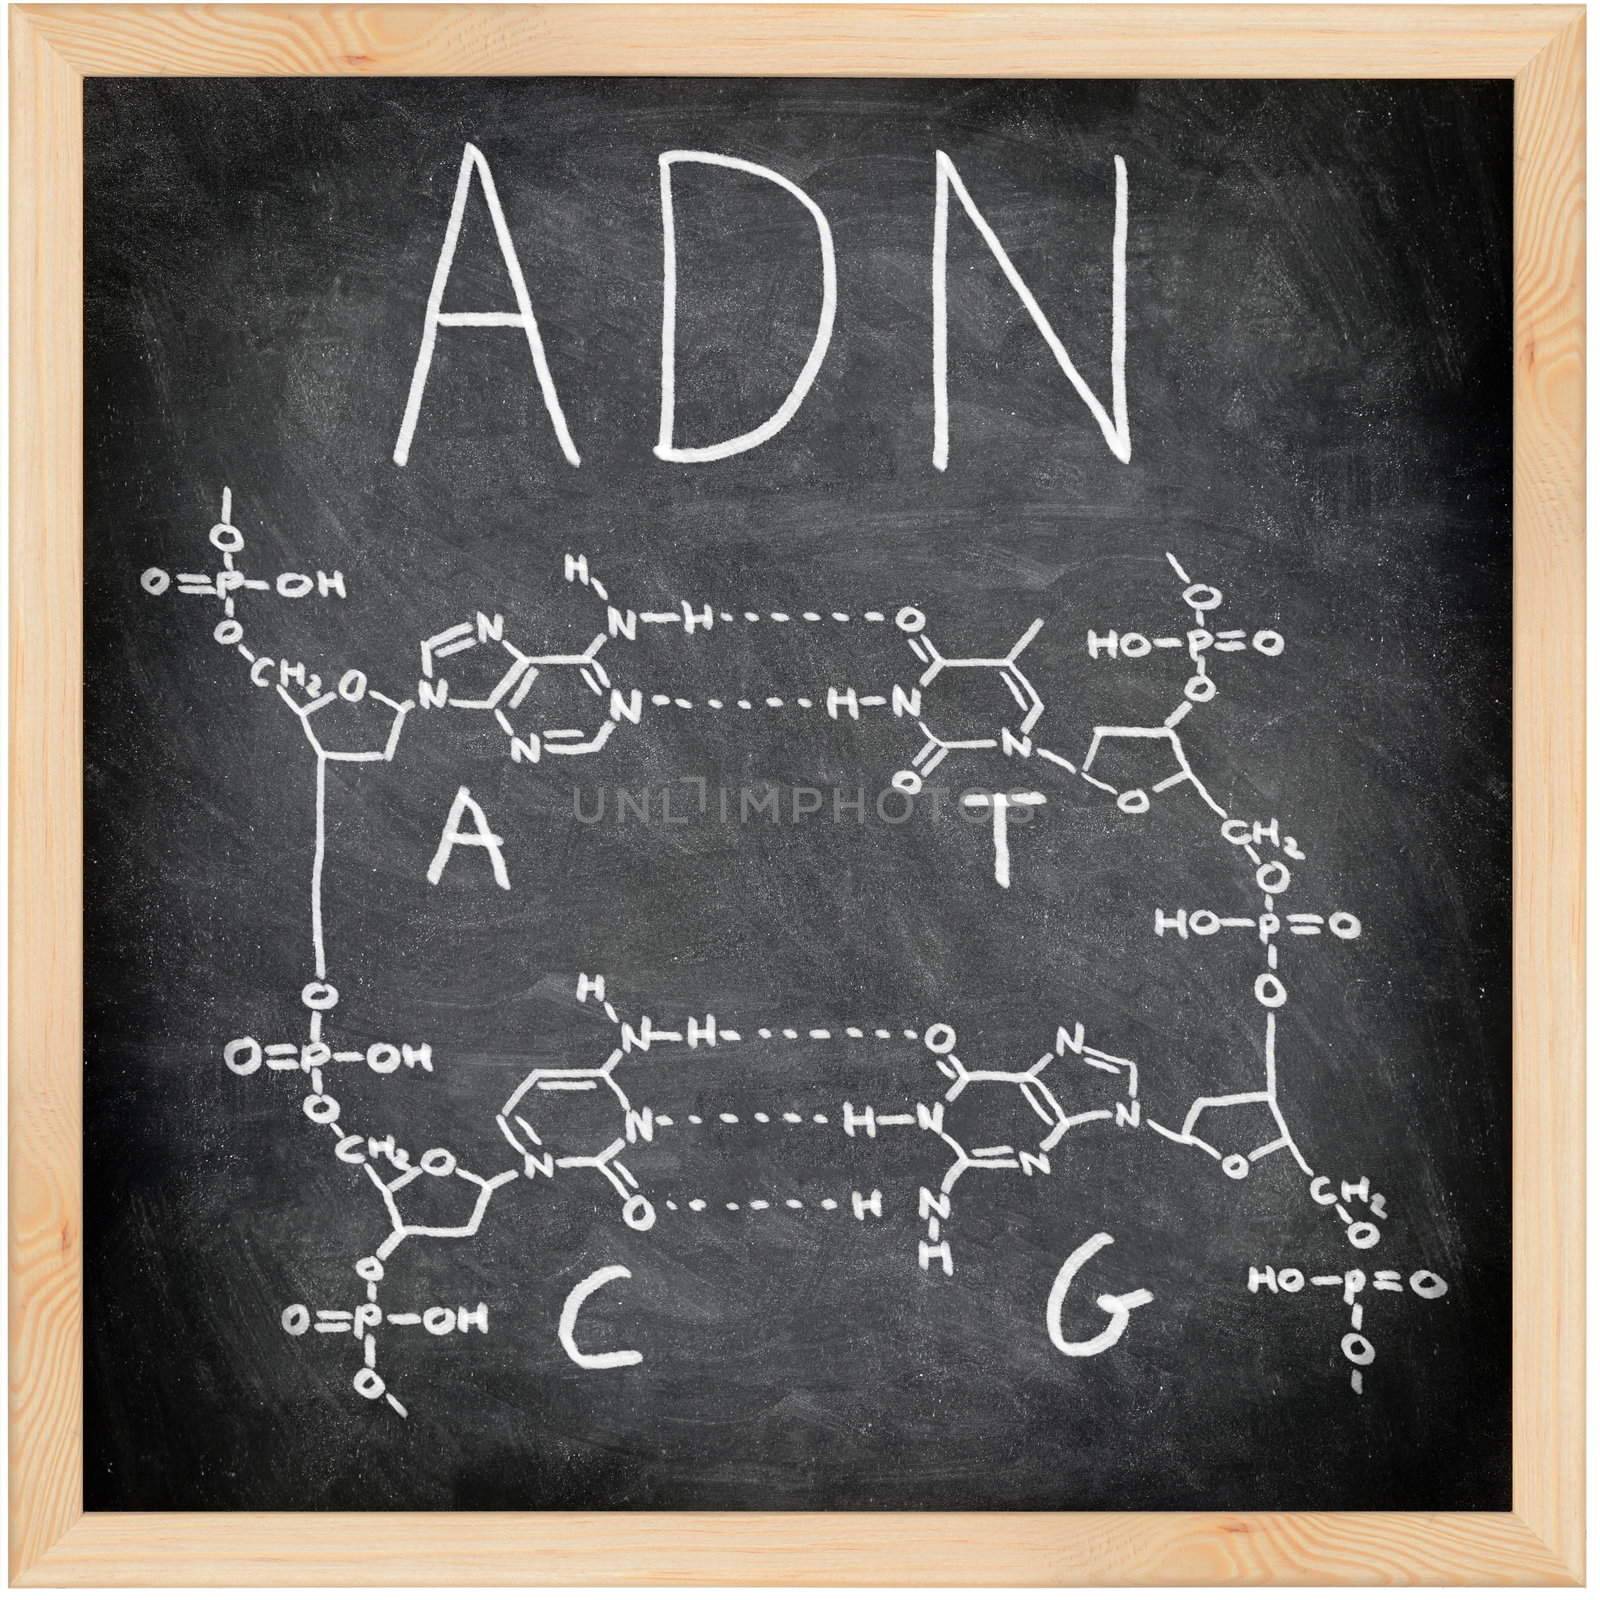 ADN - DNA in Spanish, French and Portuguese. by Maridav